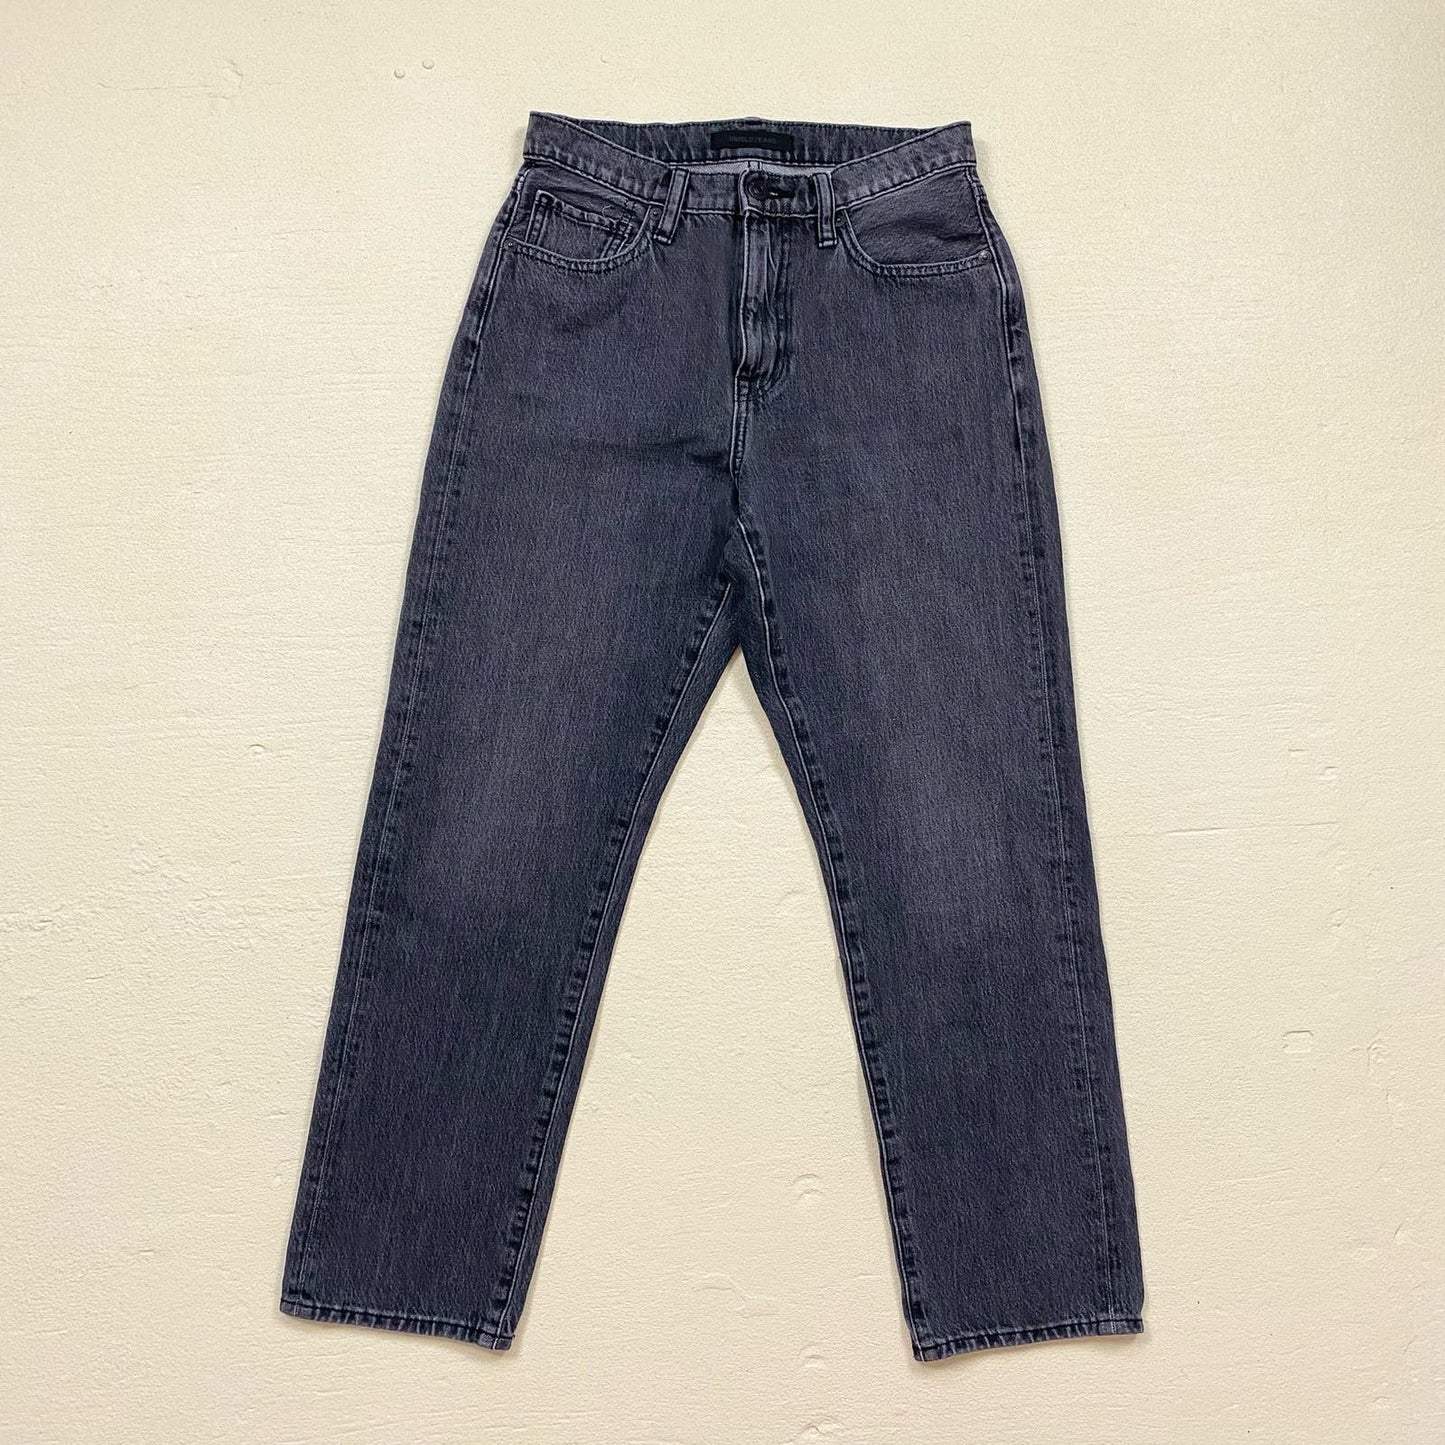 Secondhand UNIQLO High Waisted Straight Leg Gray Denim Jeans, Size 25"